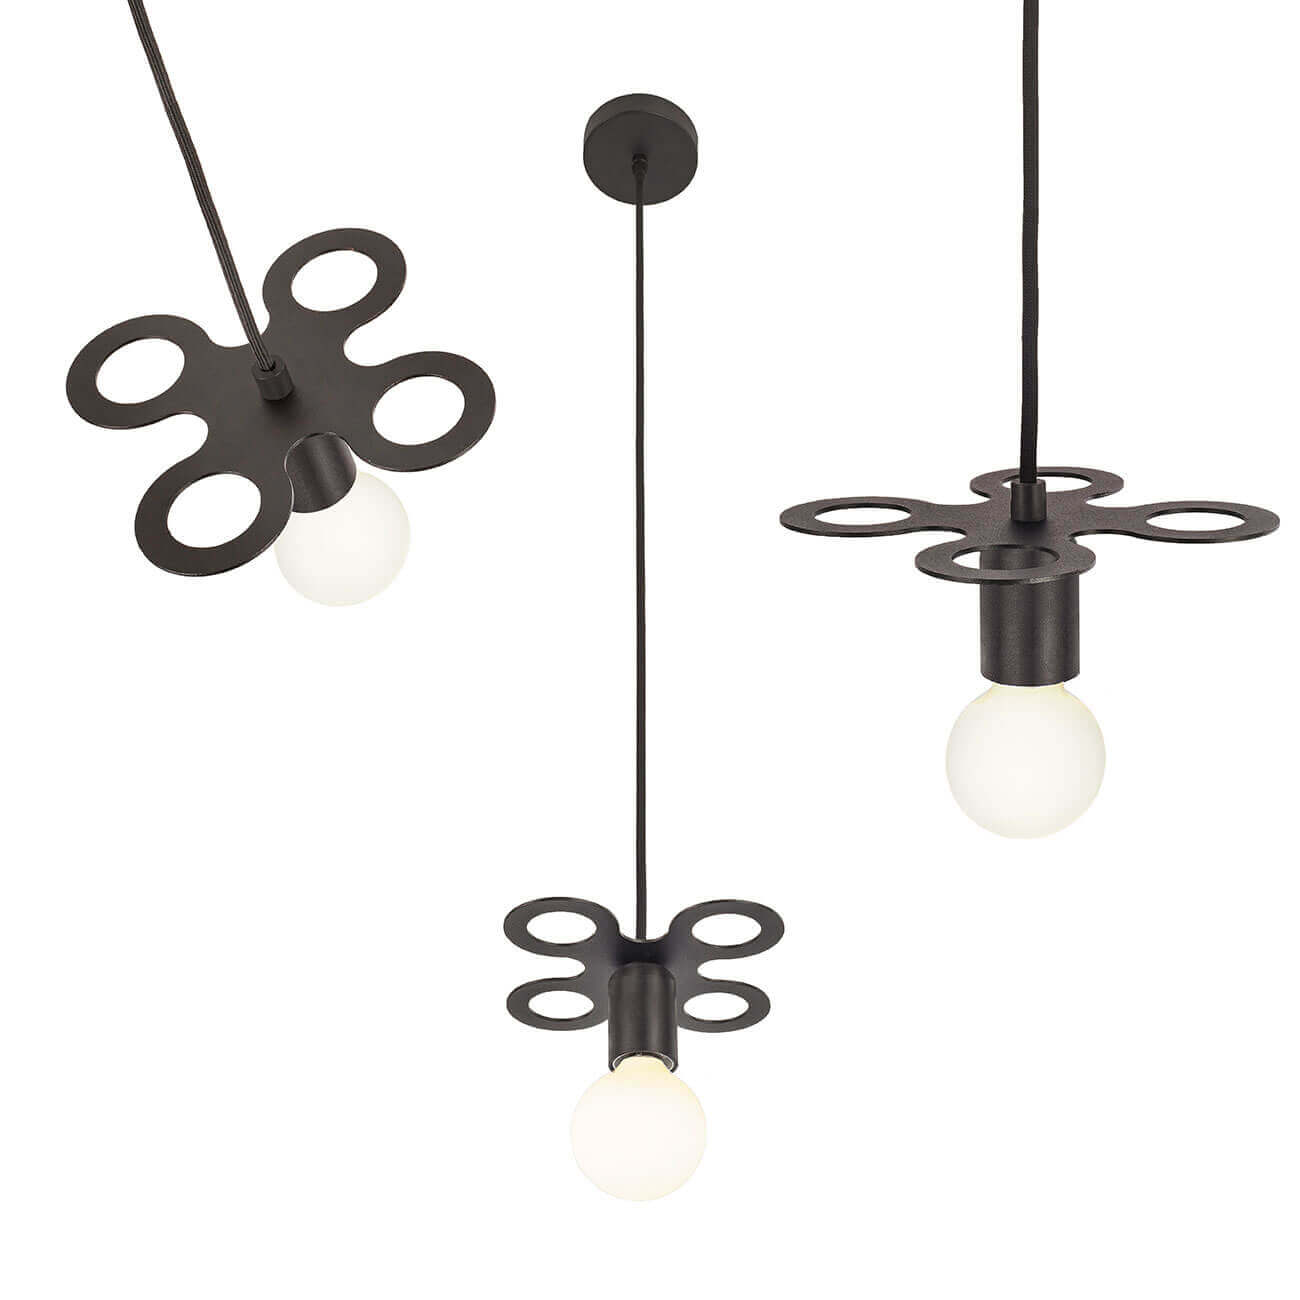 KLAVER suspension lamp, for a beautiful floral shadow pattern on the wall and against the ceiling